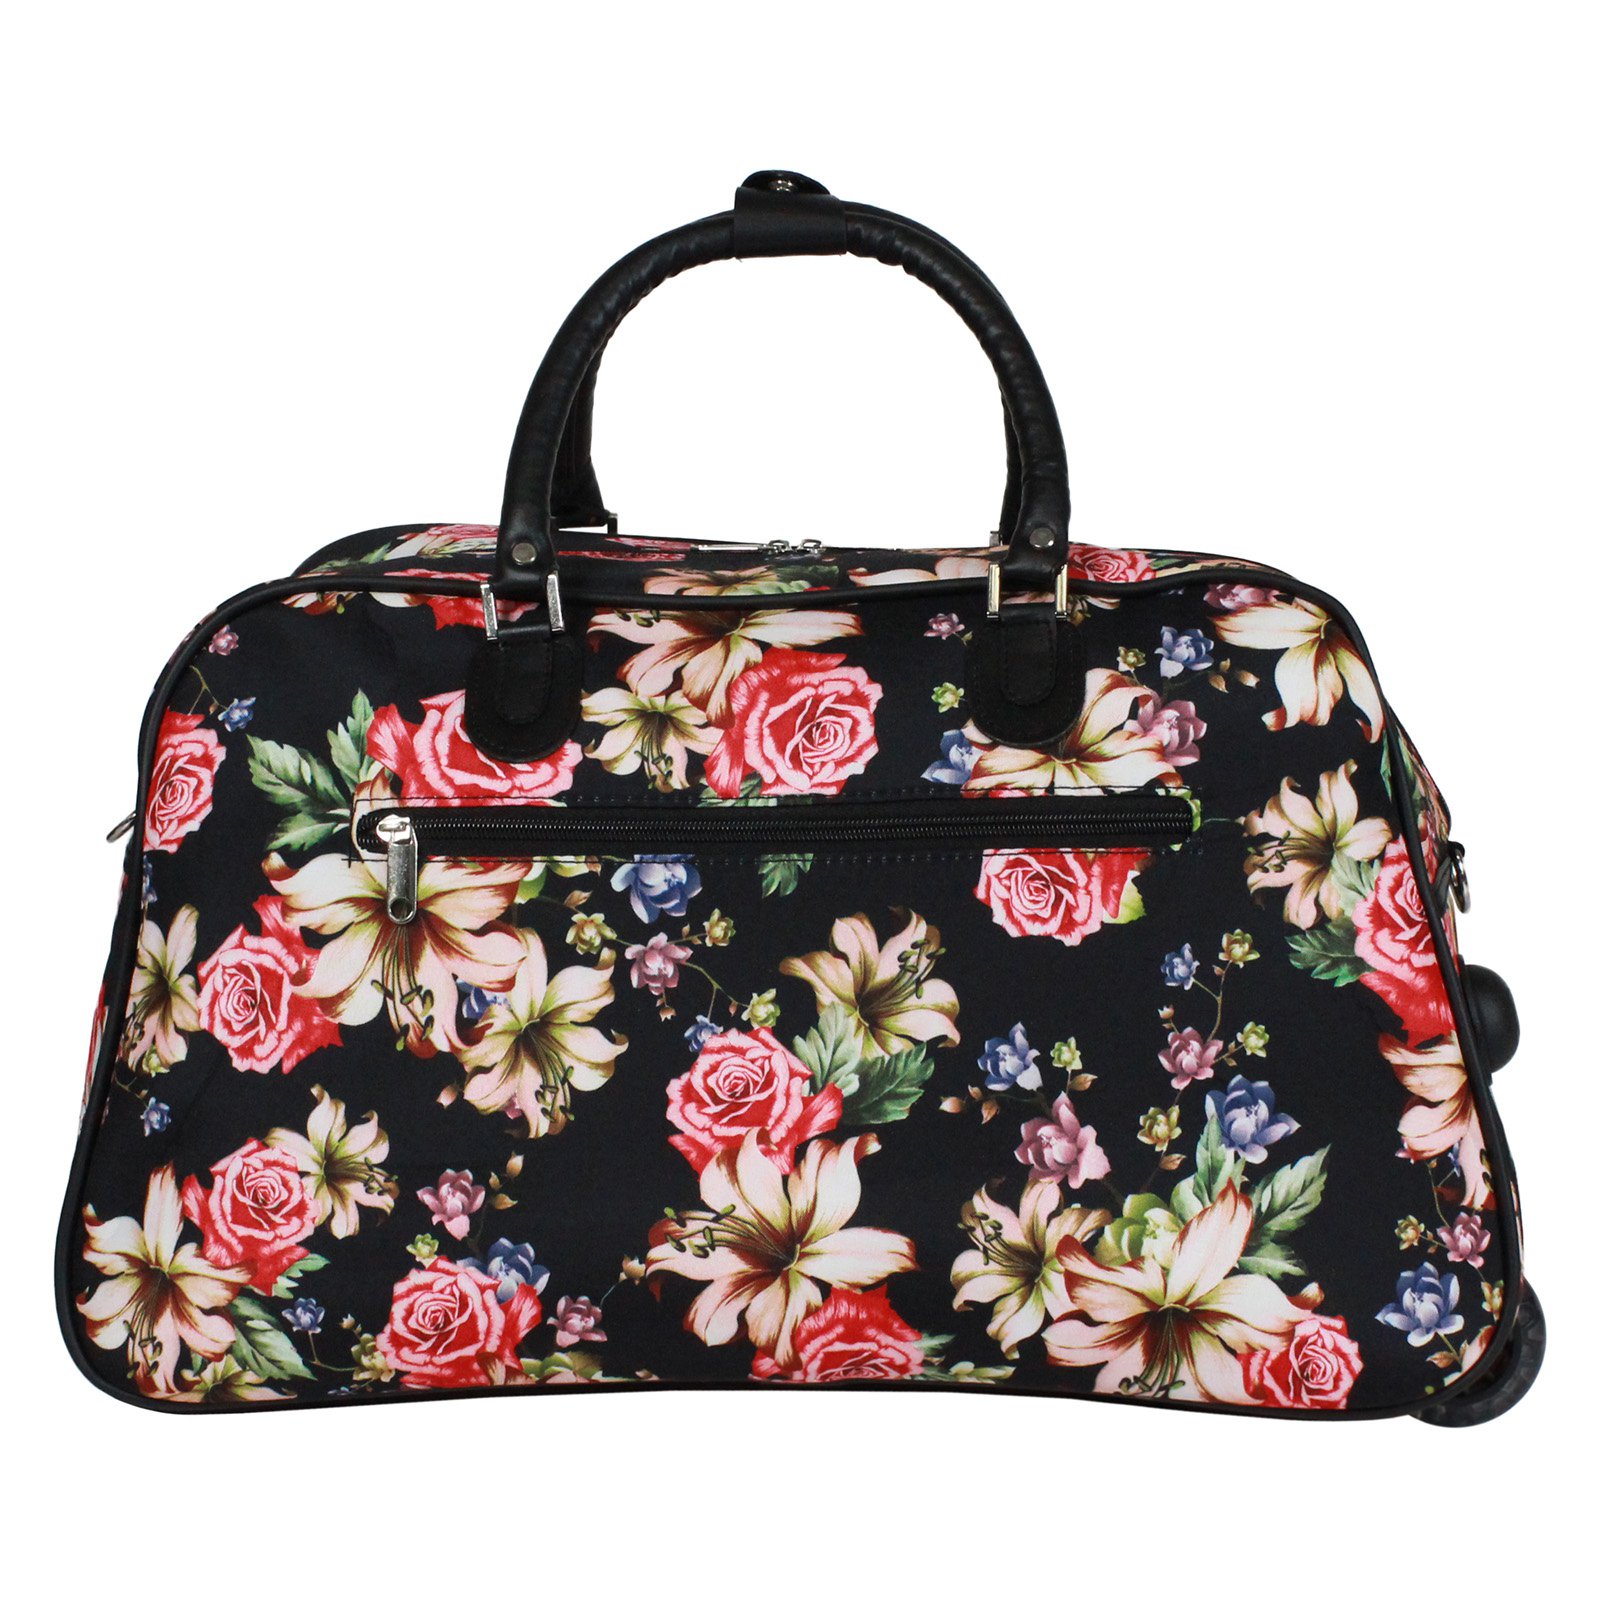 World Traveler 21-Inch Carry-On Rolling Duffel Bag - Rose Lily - image 4 of 4